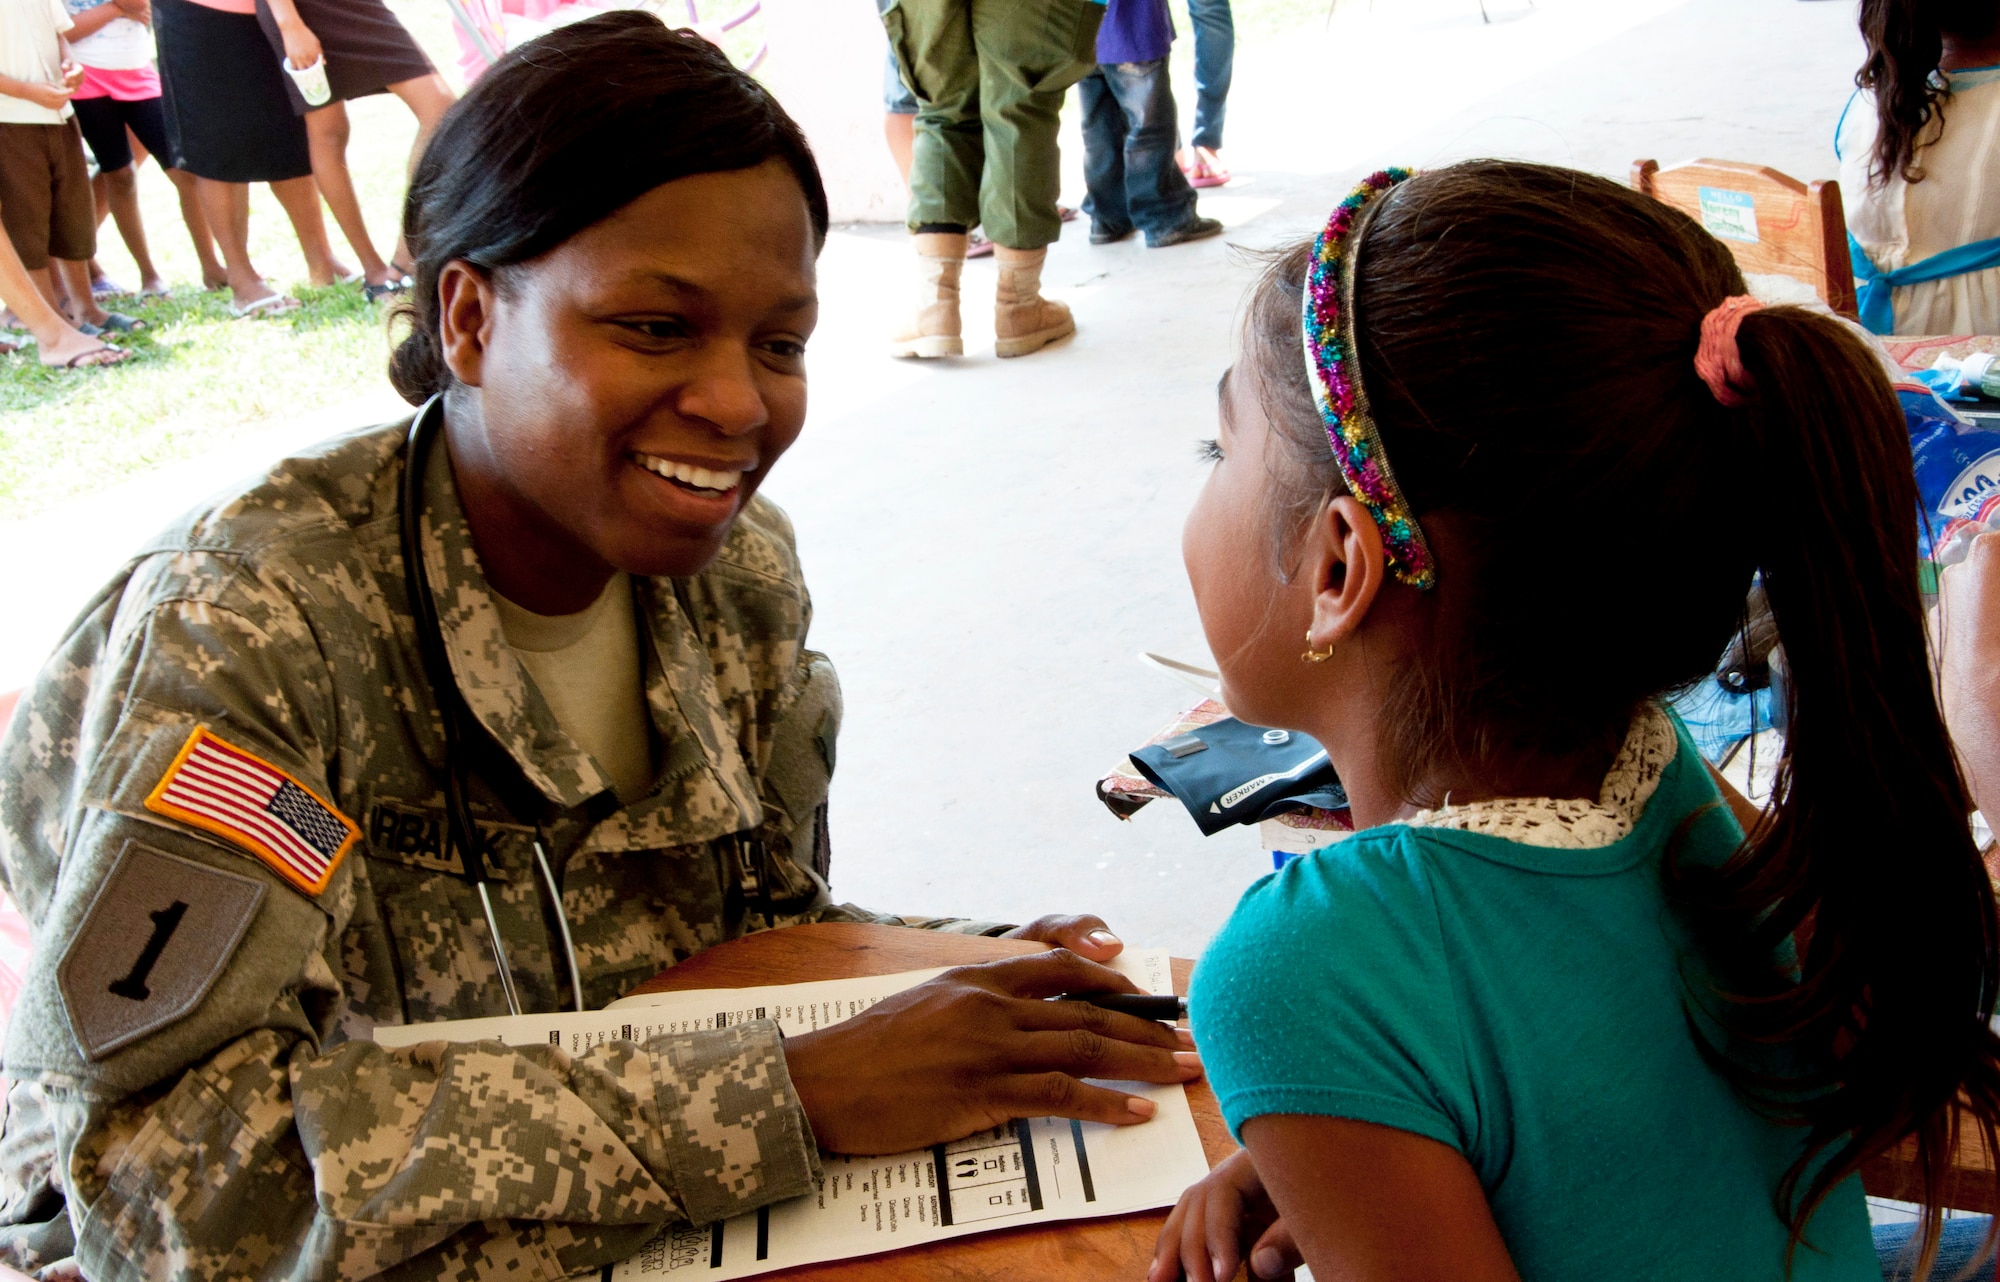 U.S. Army Sgt. Karen Burbank, medic, left, talks with a Belizean girl while checking her in for medical care April 7, 2014, at the Chunox Roman Catholic Pre-School in Chunox, Belize. Burbank, a Belize City native, is deployed from the 349th Combat Support Hospital, a Reserve unit in Los Angelas, Calif. The care was provided as part of a medical training exercise, or MEDRETE, that offers U.S. and Canadian military doctors and nurses the opportunity to train and interact with their Belizean counterparts. Free care will also be available 9 a.m. to 4 p.m. April 14-17 at the Libertad Methodist School. (U.S. Air Force photo by Tech. Sgt. Kali L. Gradishar/Released)